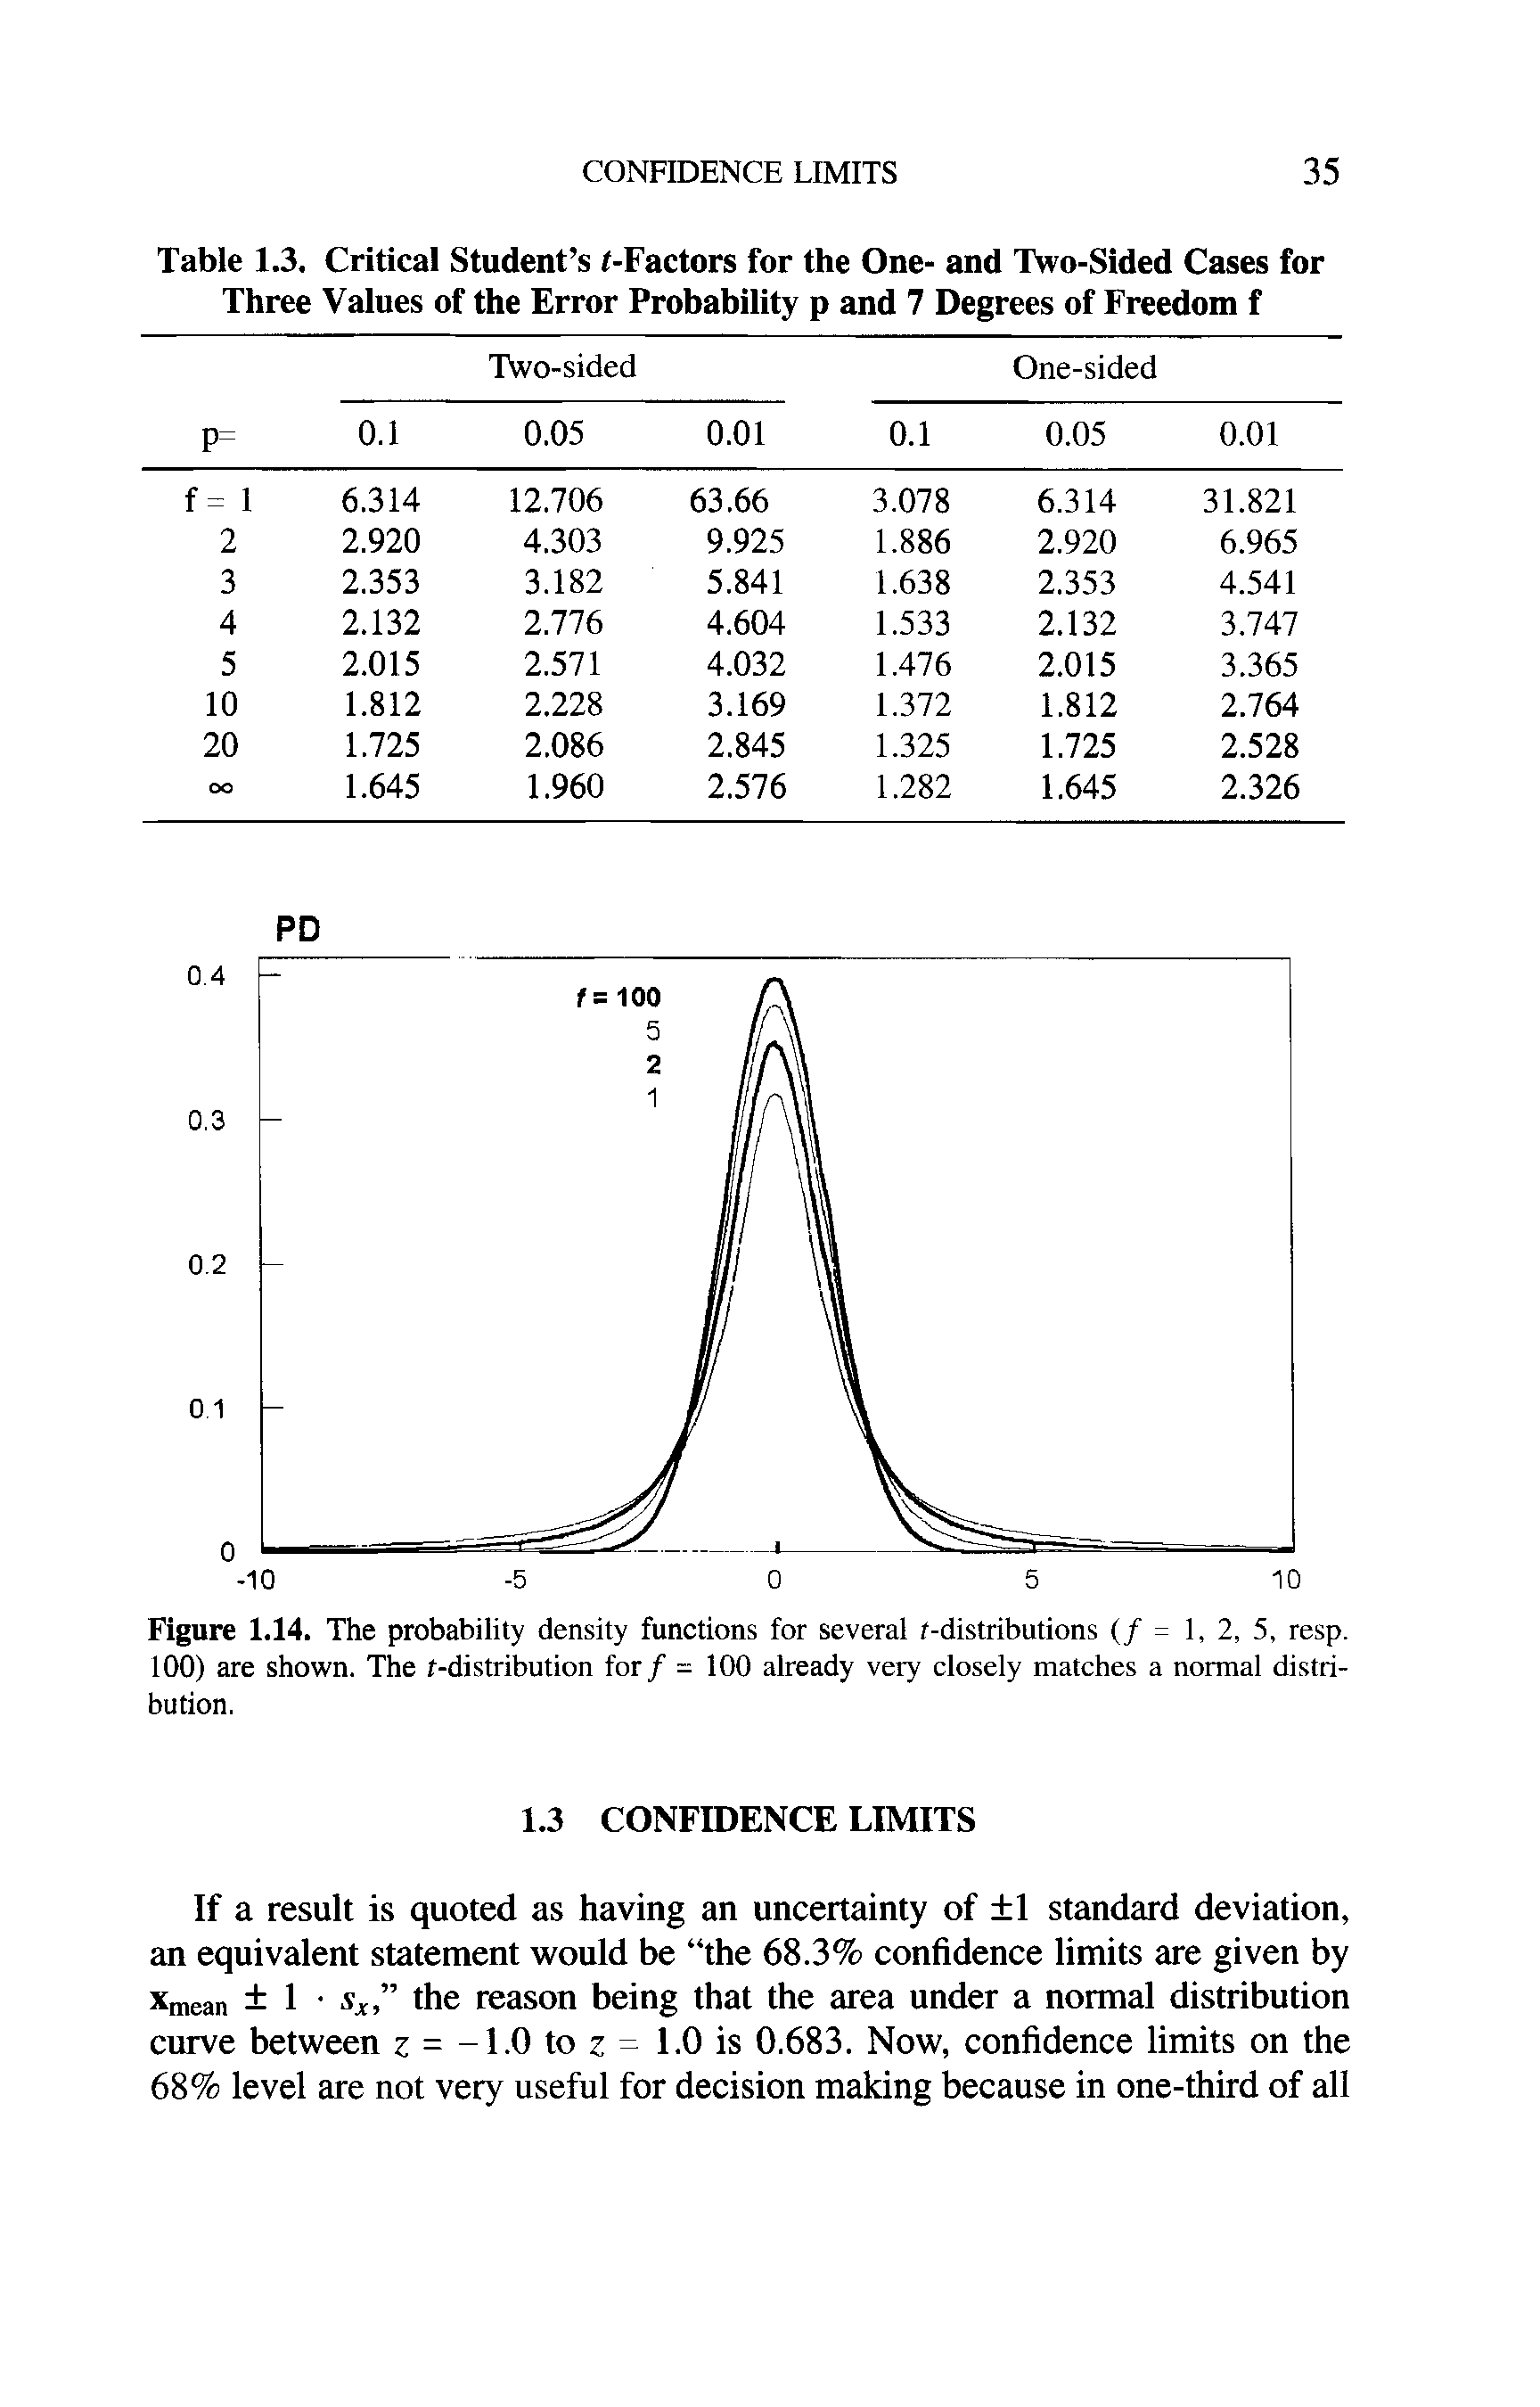 Figure 1.14. The probability density functions for several f-distributions (/ = 1, 2, 5, resp. 100) are shown. The f-distribution for / = 100 already very closely matches a normal distribution.